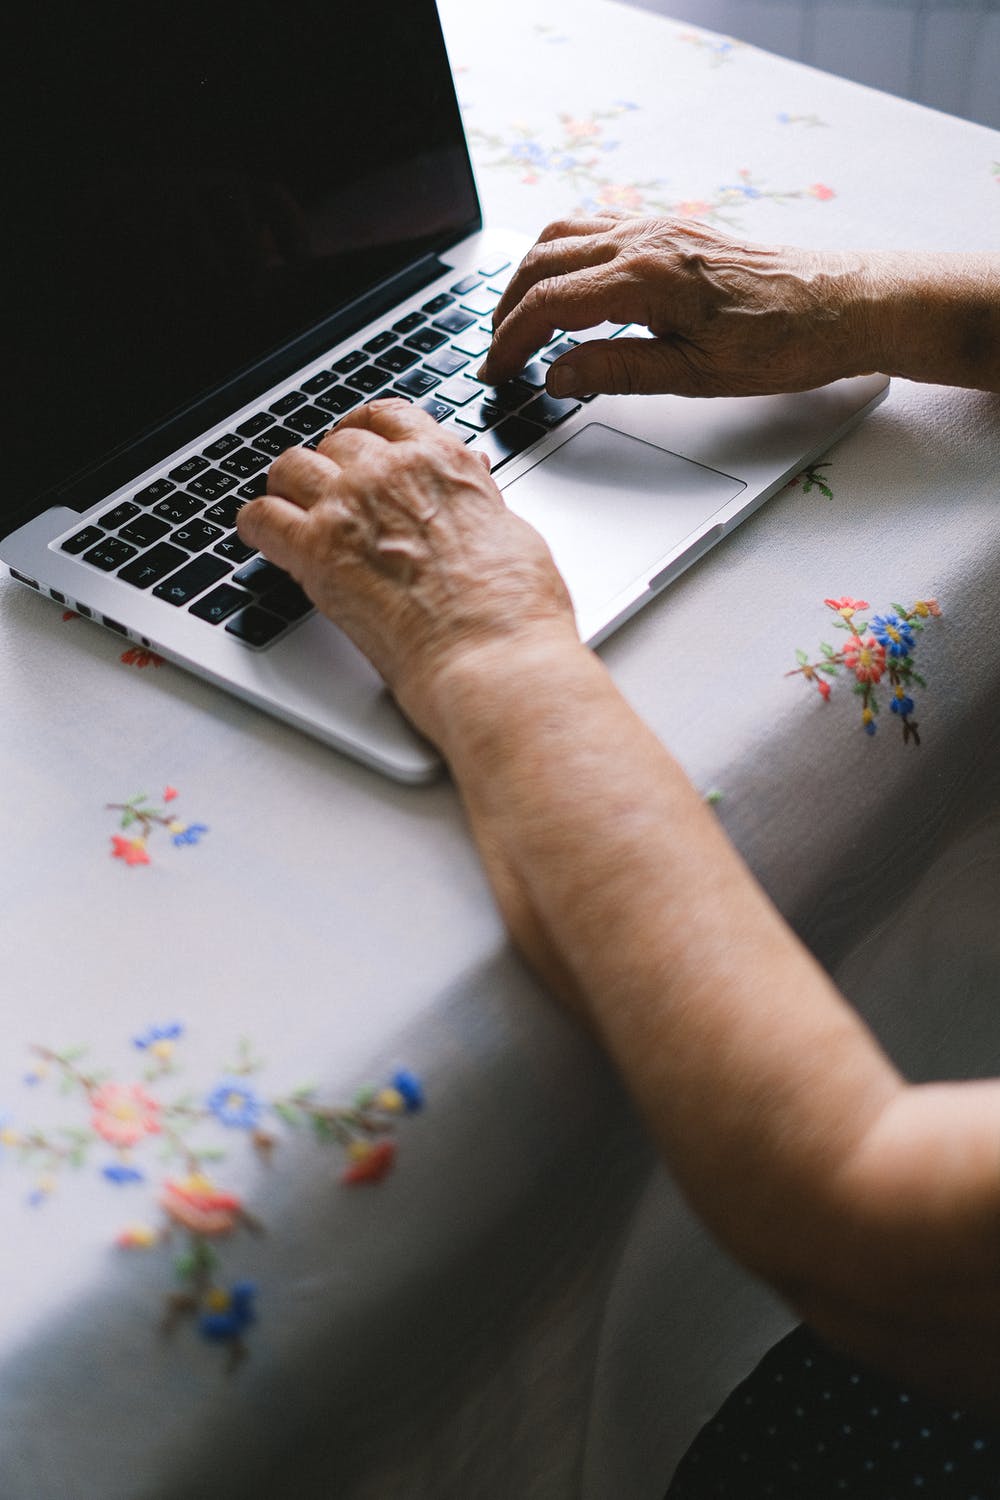 Hands typing on a computer. | Source: Pexels